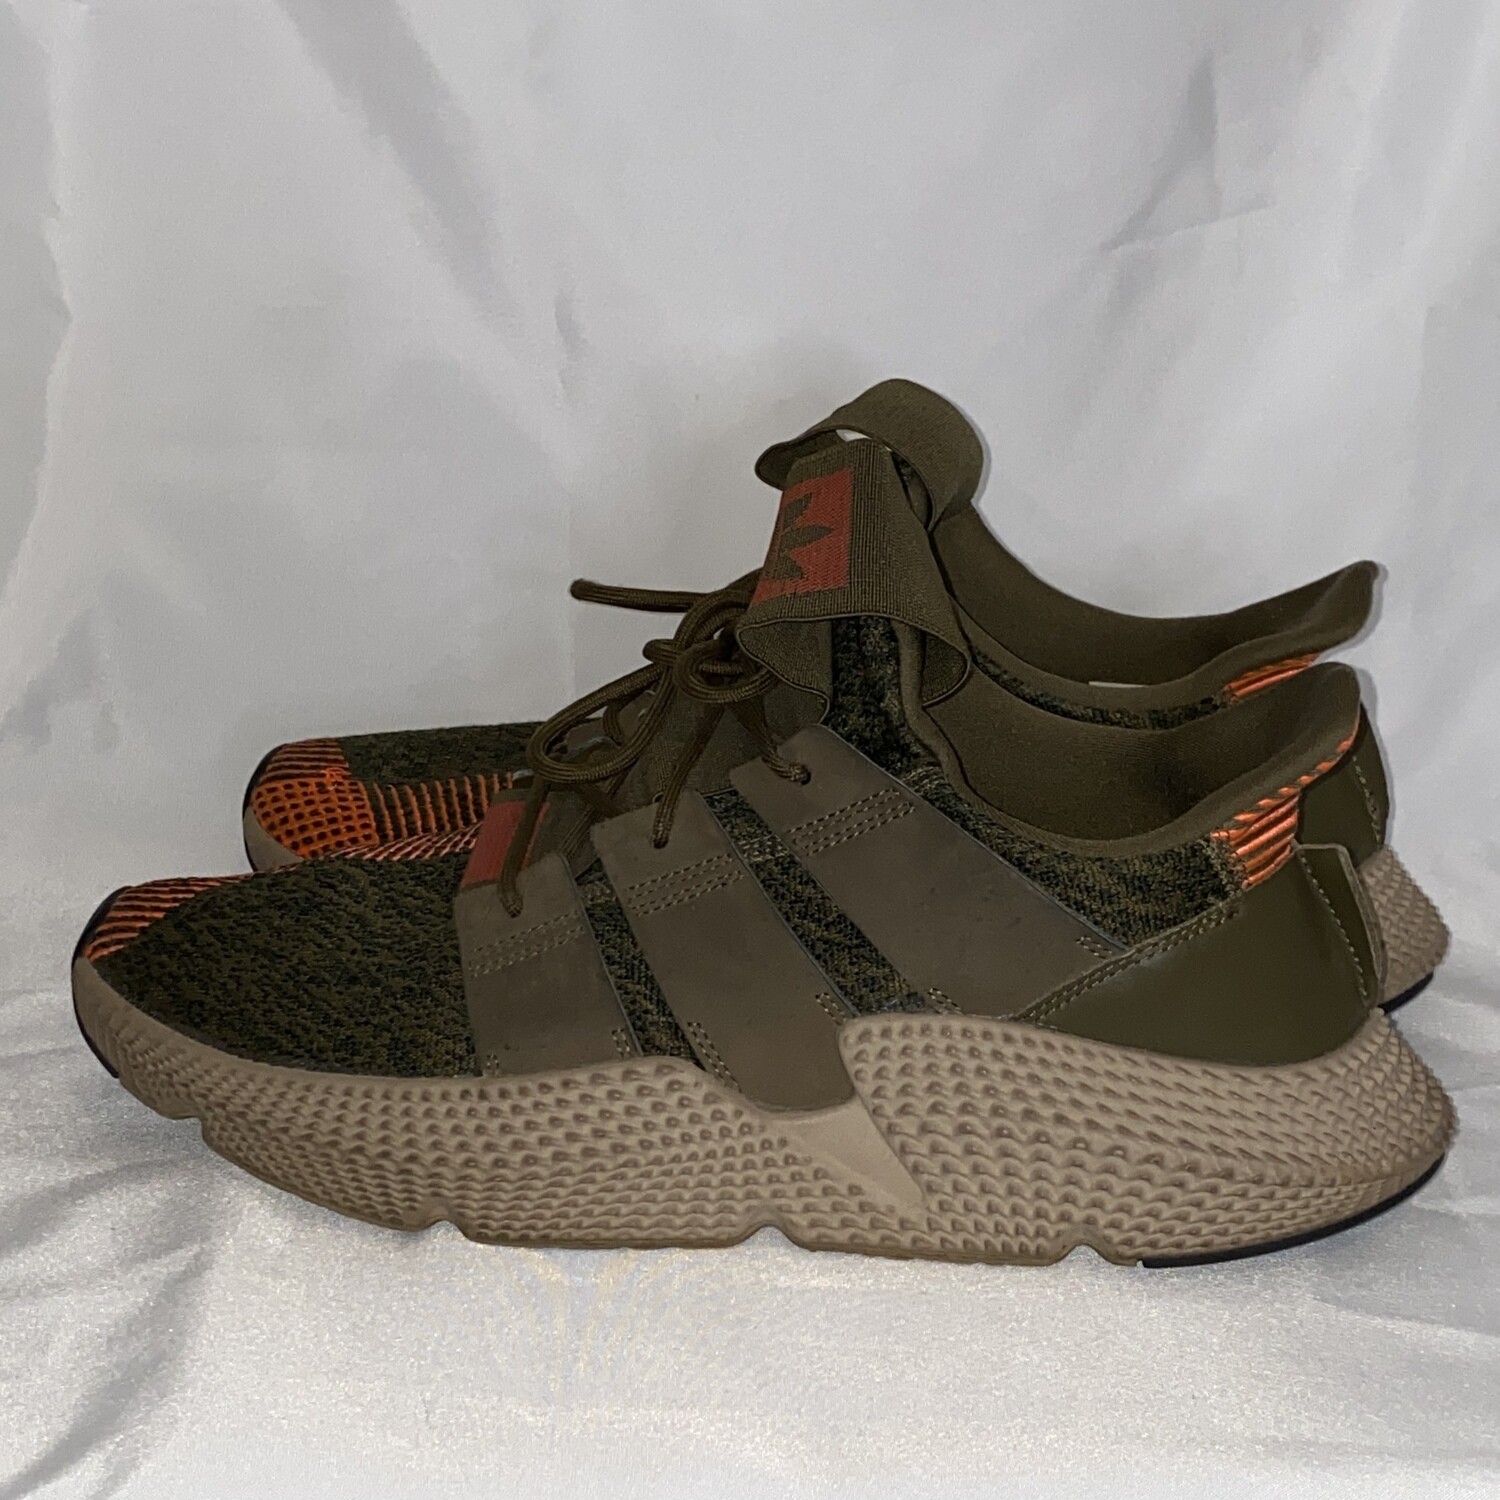 Adidas Prophere 'Trace Olive' Men's Size 12